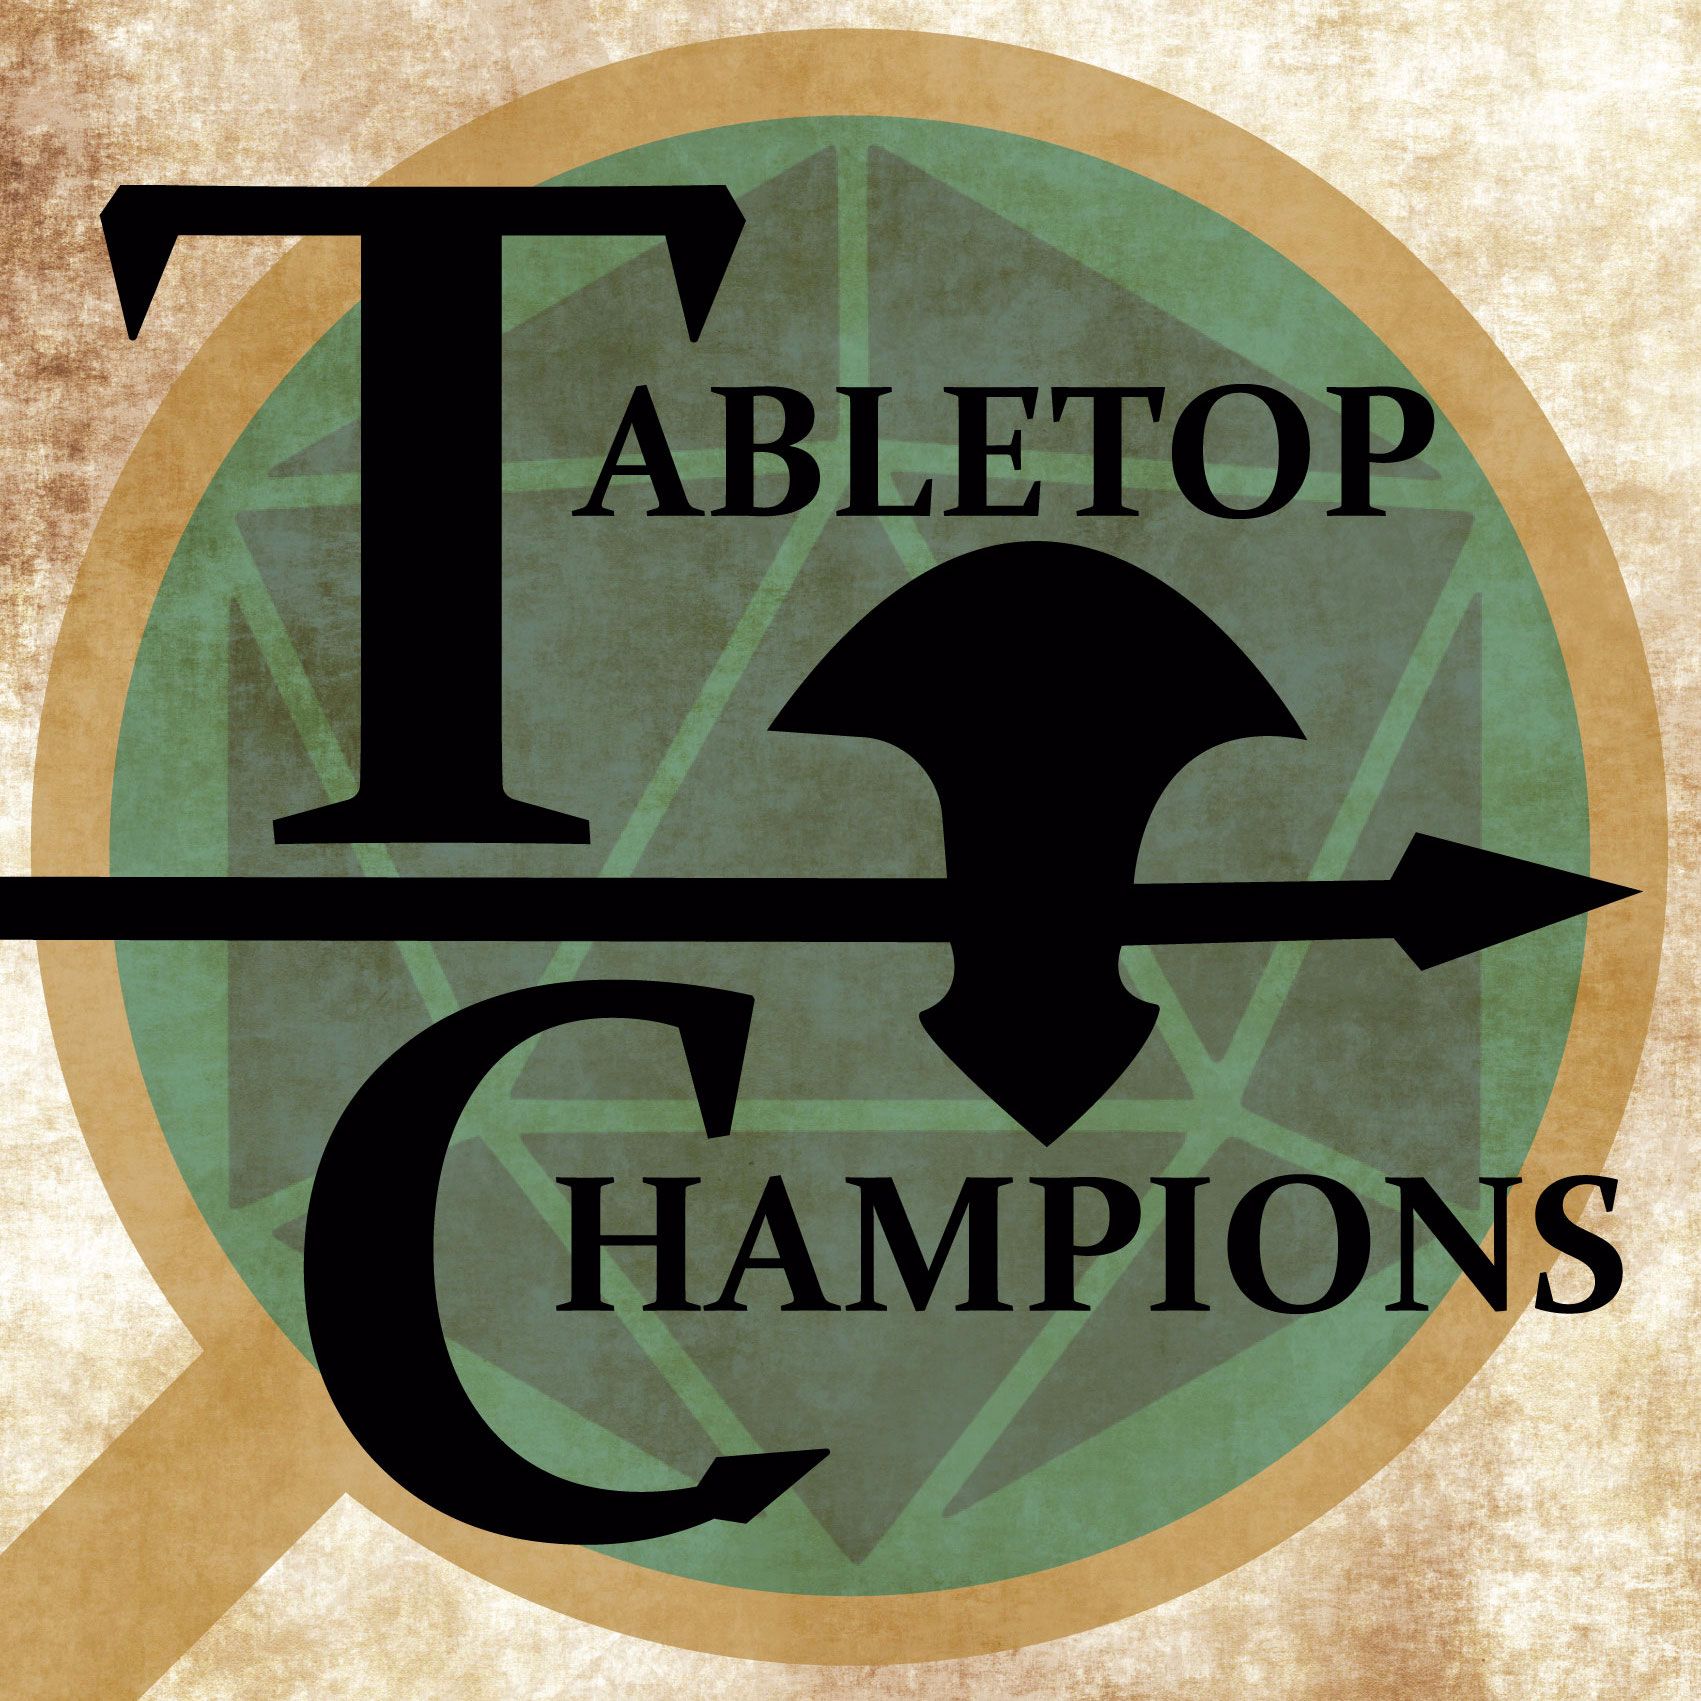 Tabletop Champions - Real Play D&D 5E (DND5e)